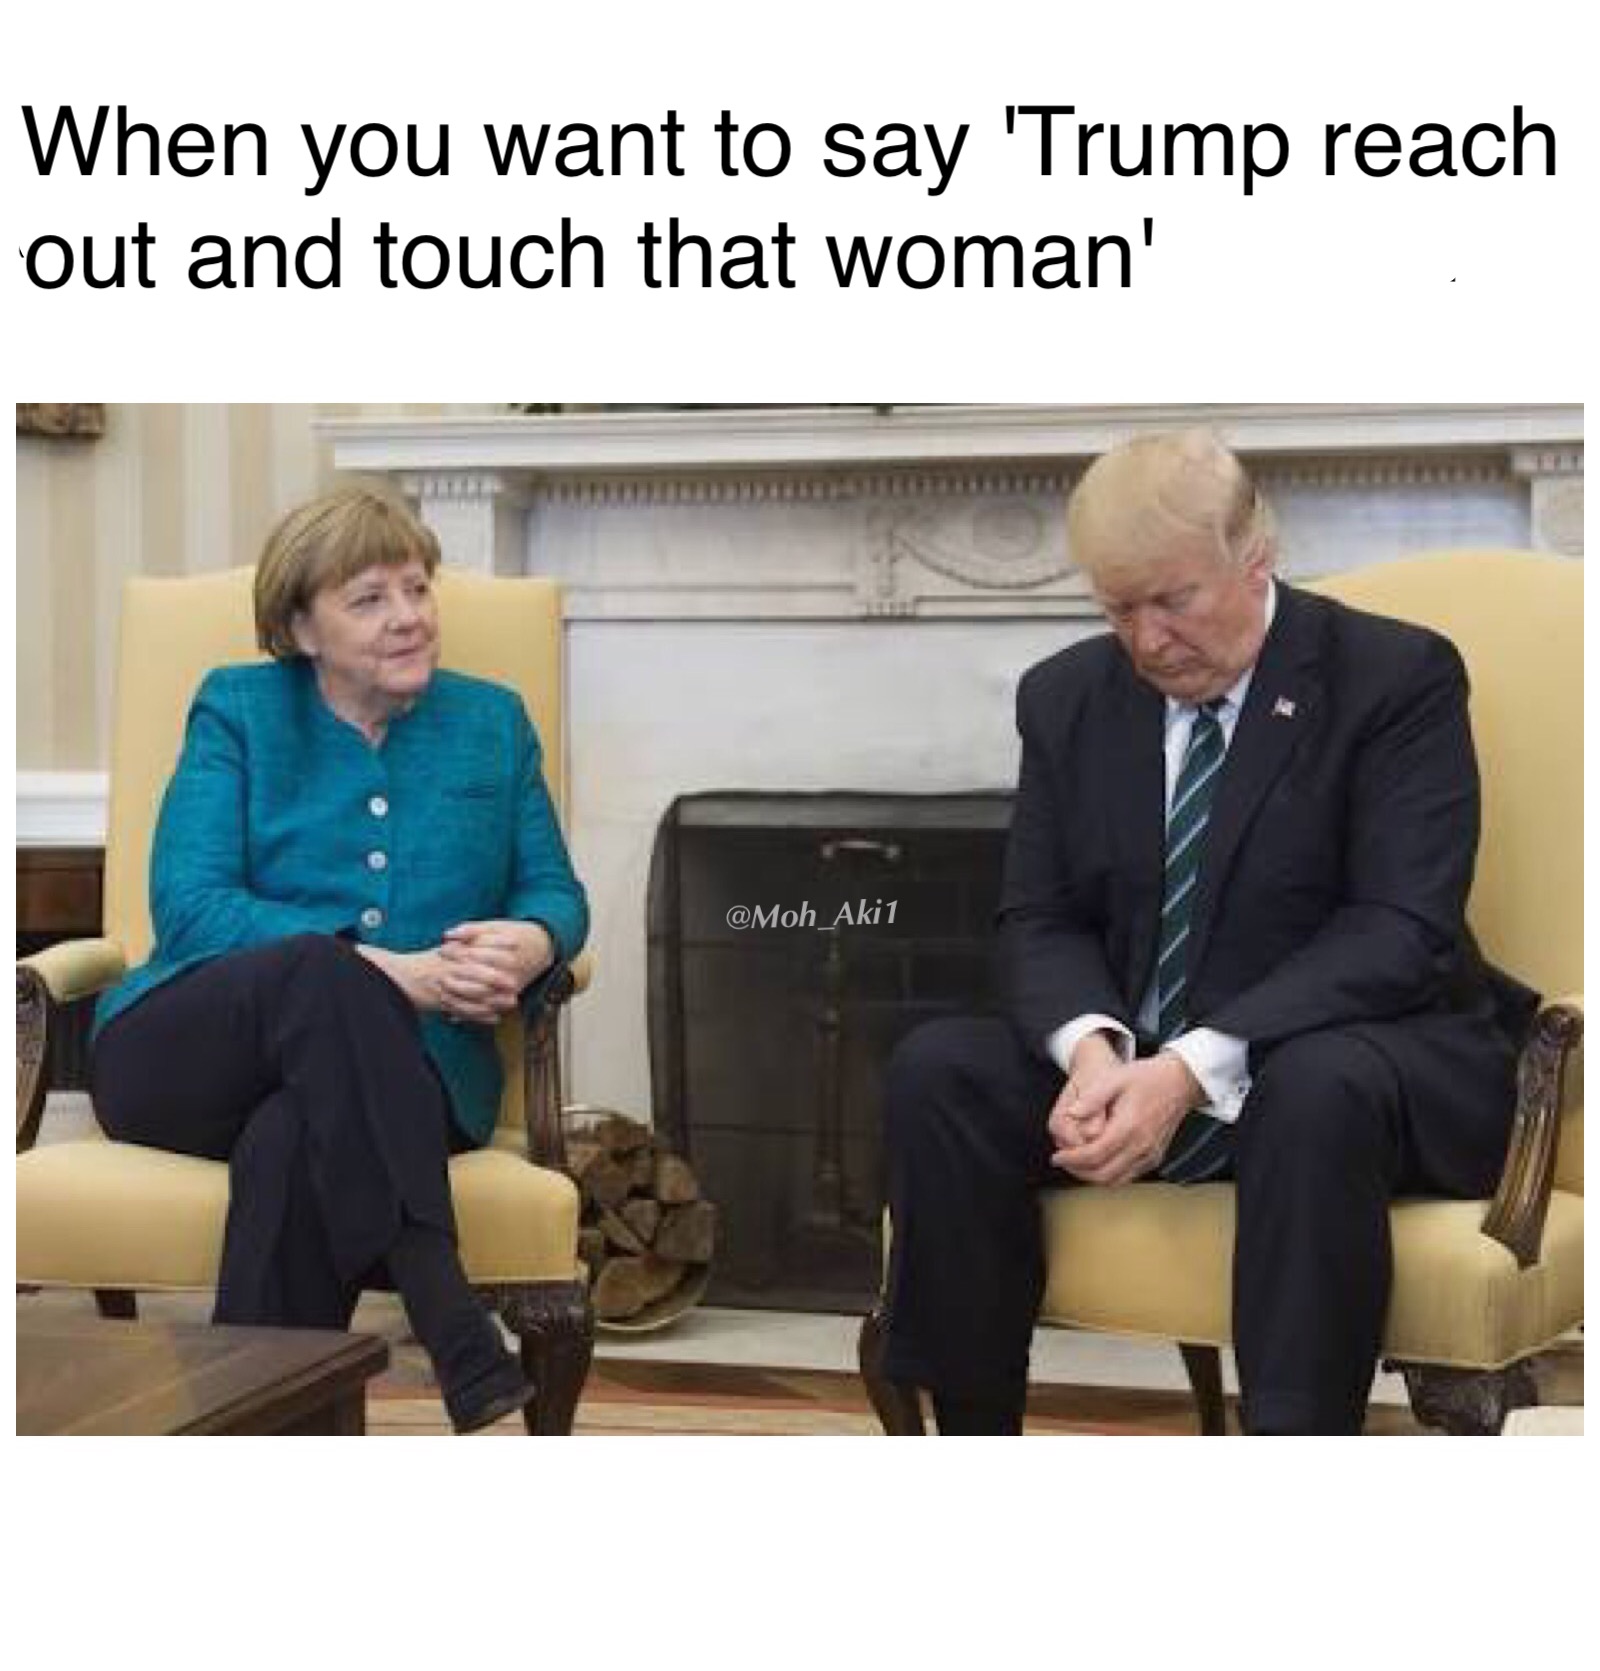 trump angela merkel handshake - When you want to say 'Trump reach out and touch that woman'